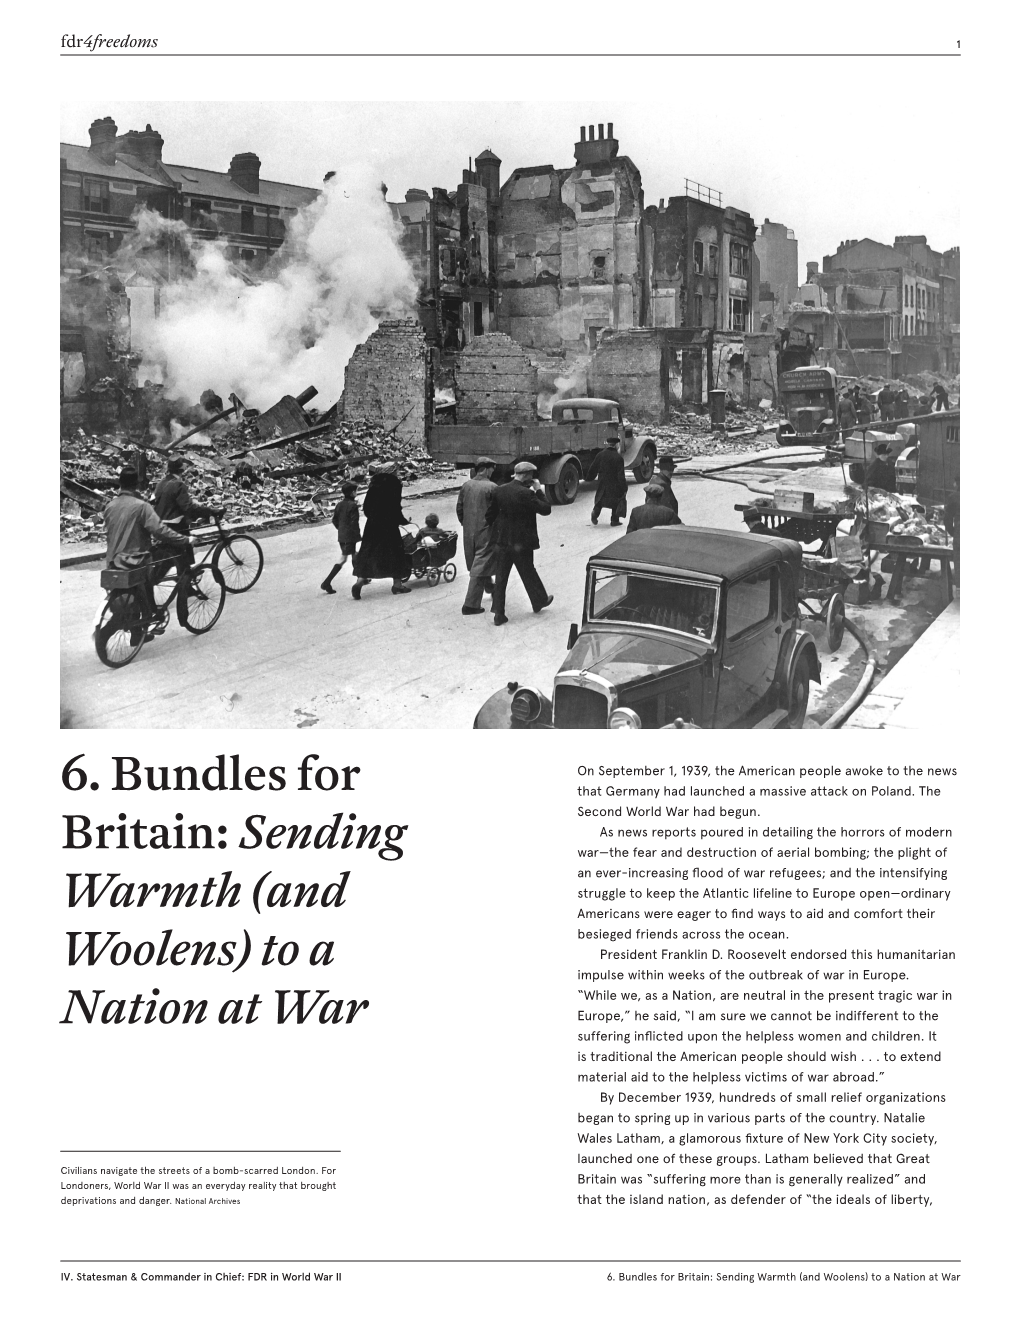 6. Bundles for Britain: Sending Warmth (And Woolens) to a Nation at War Fdr4freedoms 2